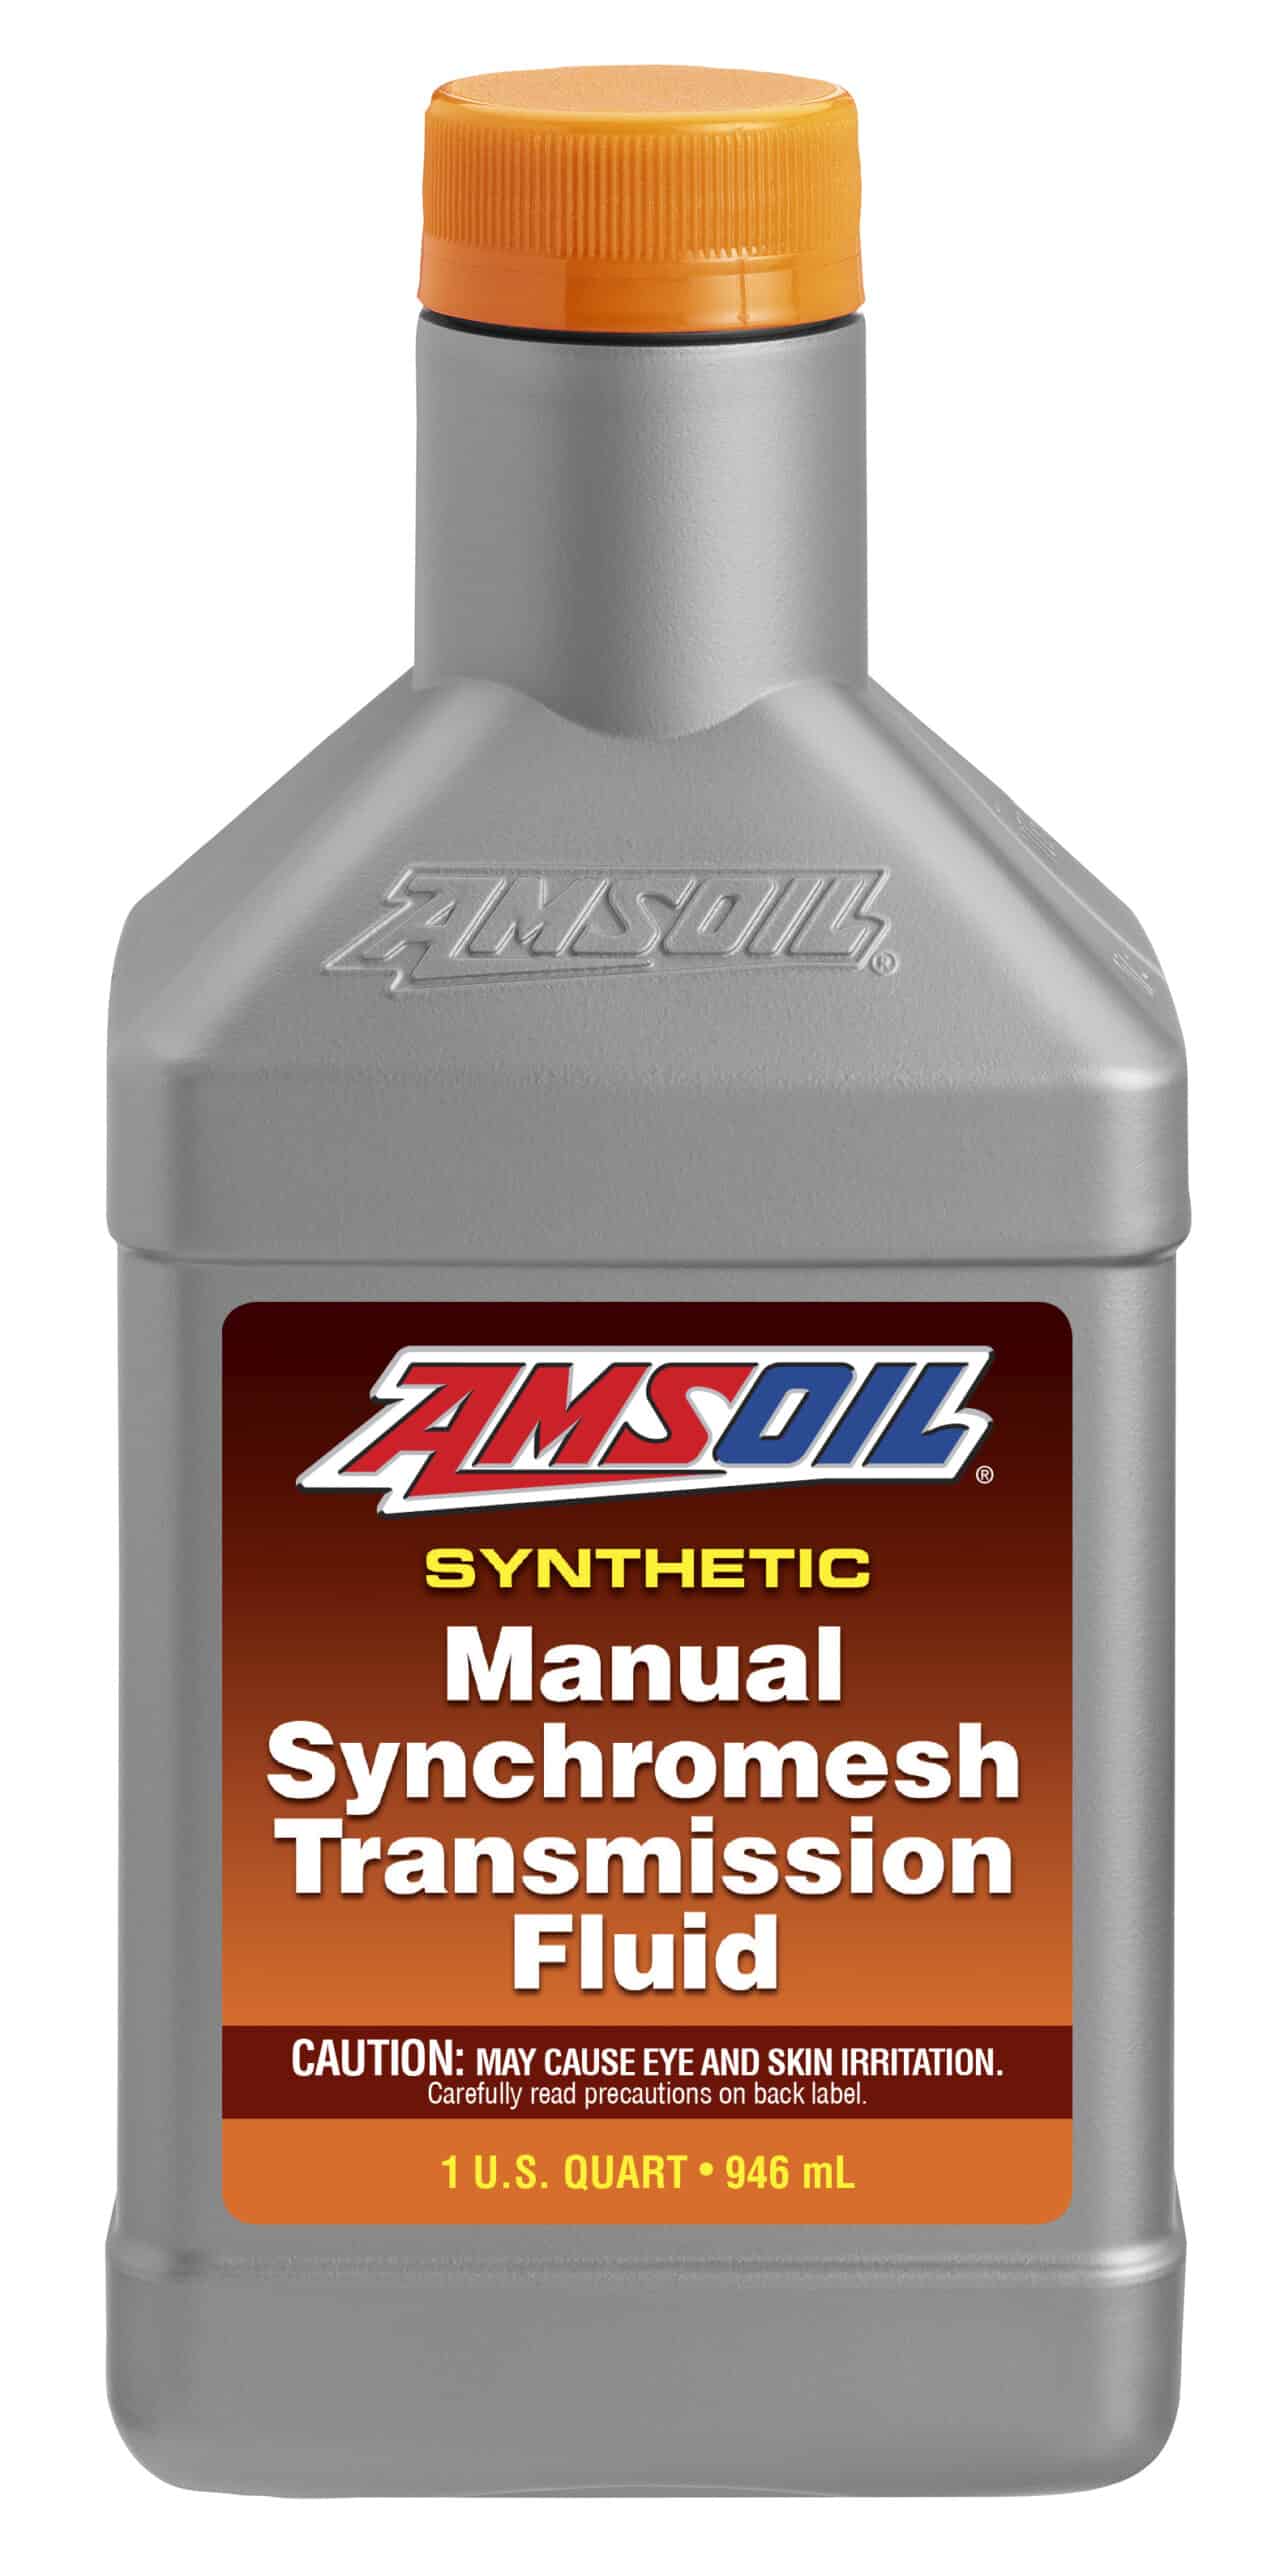 A bottle of AMSOIL Manual Synchromesh Transmission Fluid, formulated to maximize fuel economy while resisting the effects of heat, oxidation and varnish deposits.